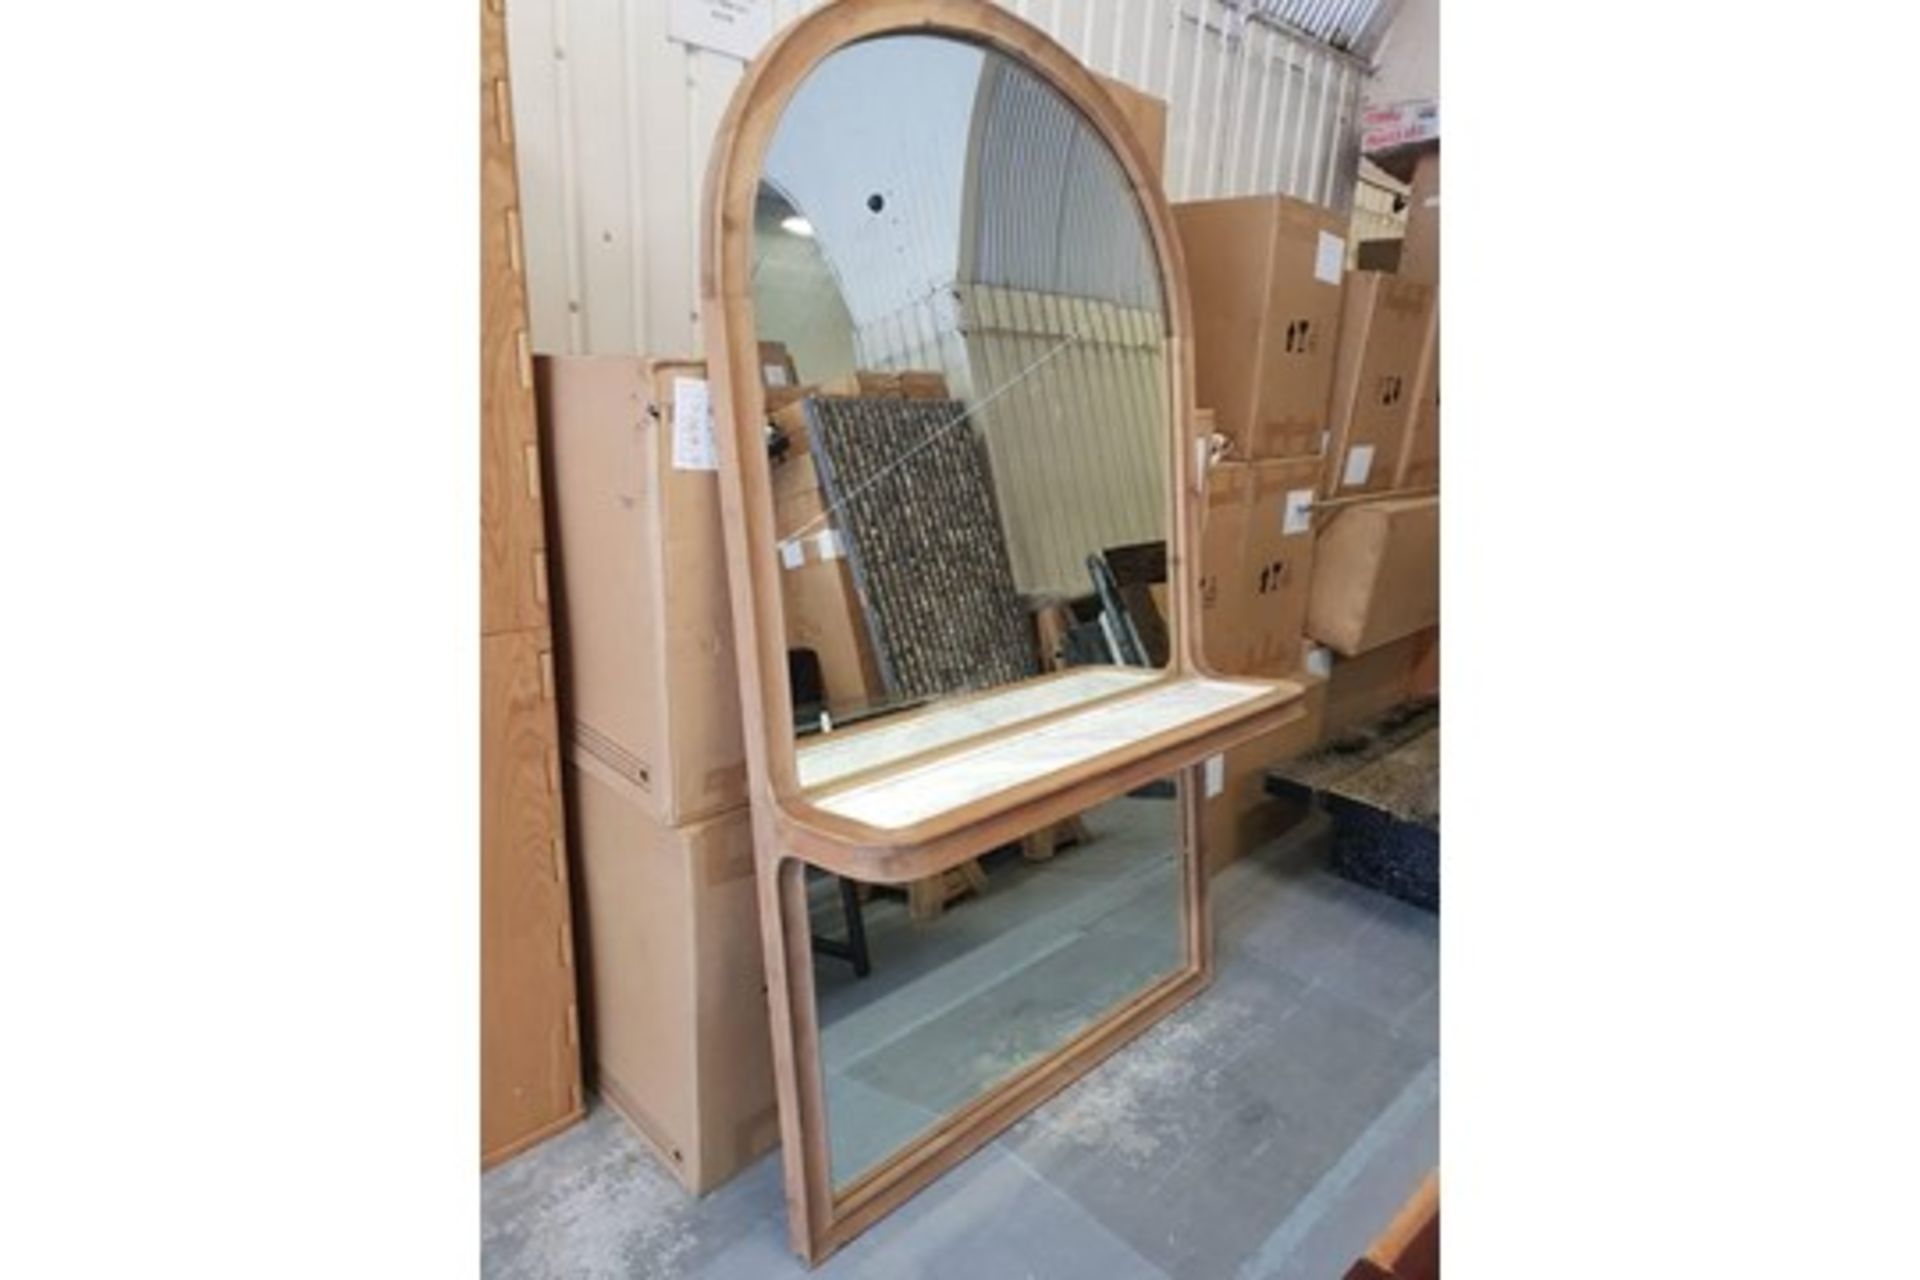 Mirror Arch Dome Mirror With Marble Shelf - Constructed in Recycled Oak Wood With A Honed Marble - Image 2 of 3